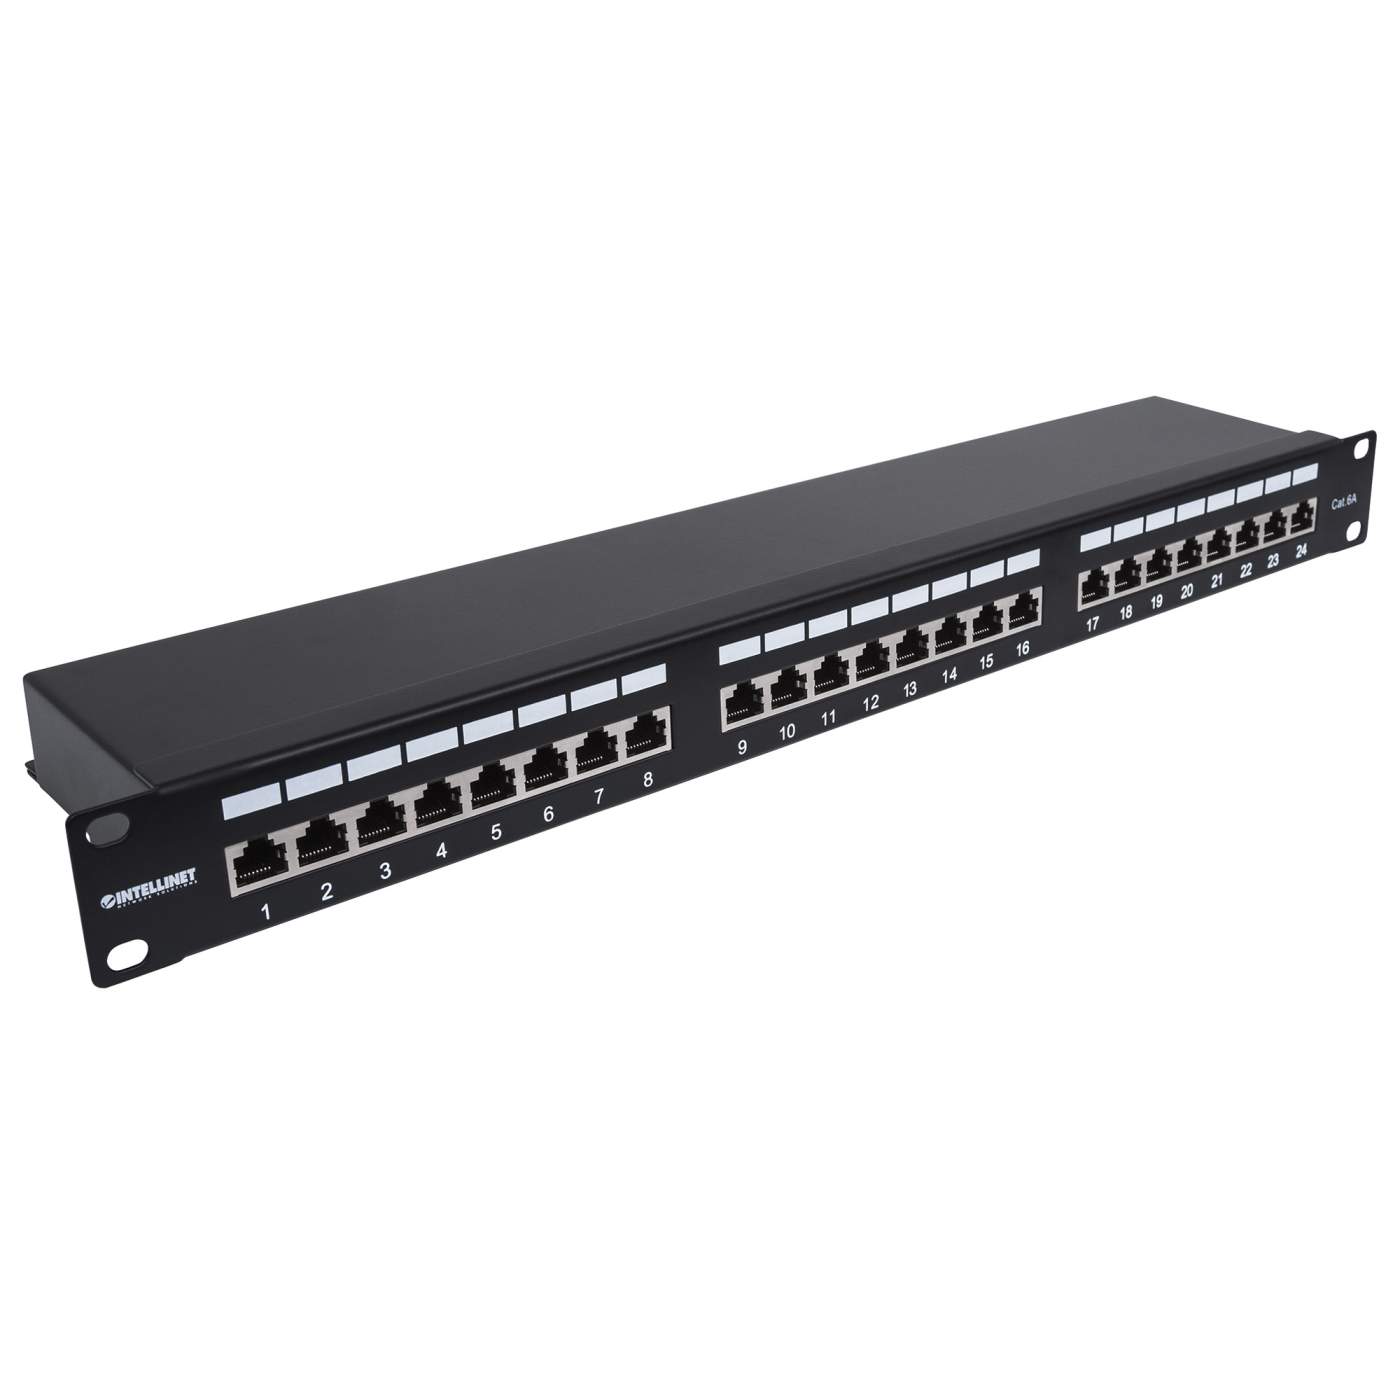 Cat6a Shielded Patch Panel Image 2